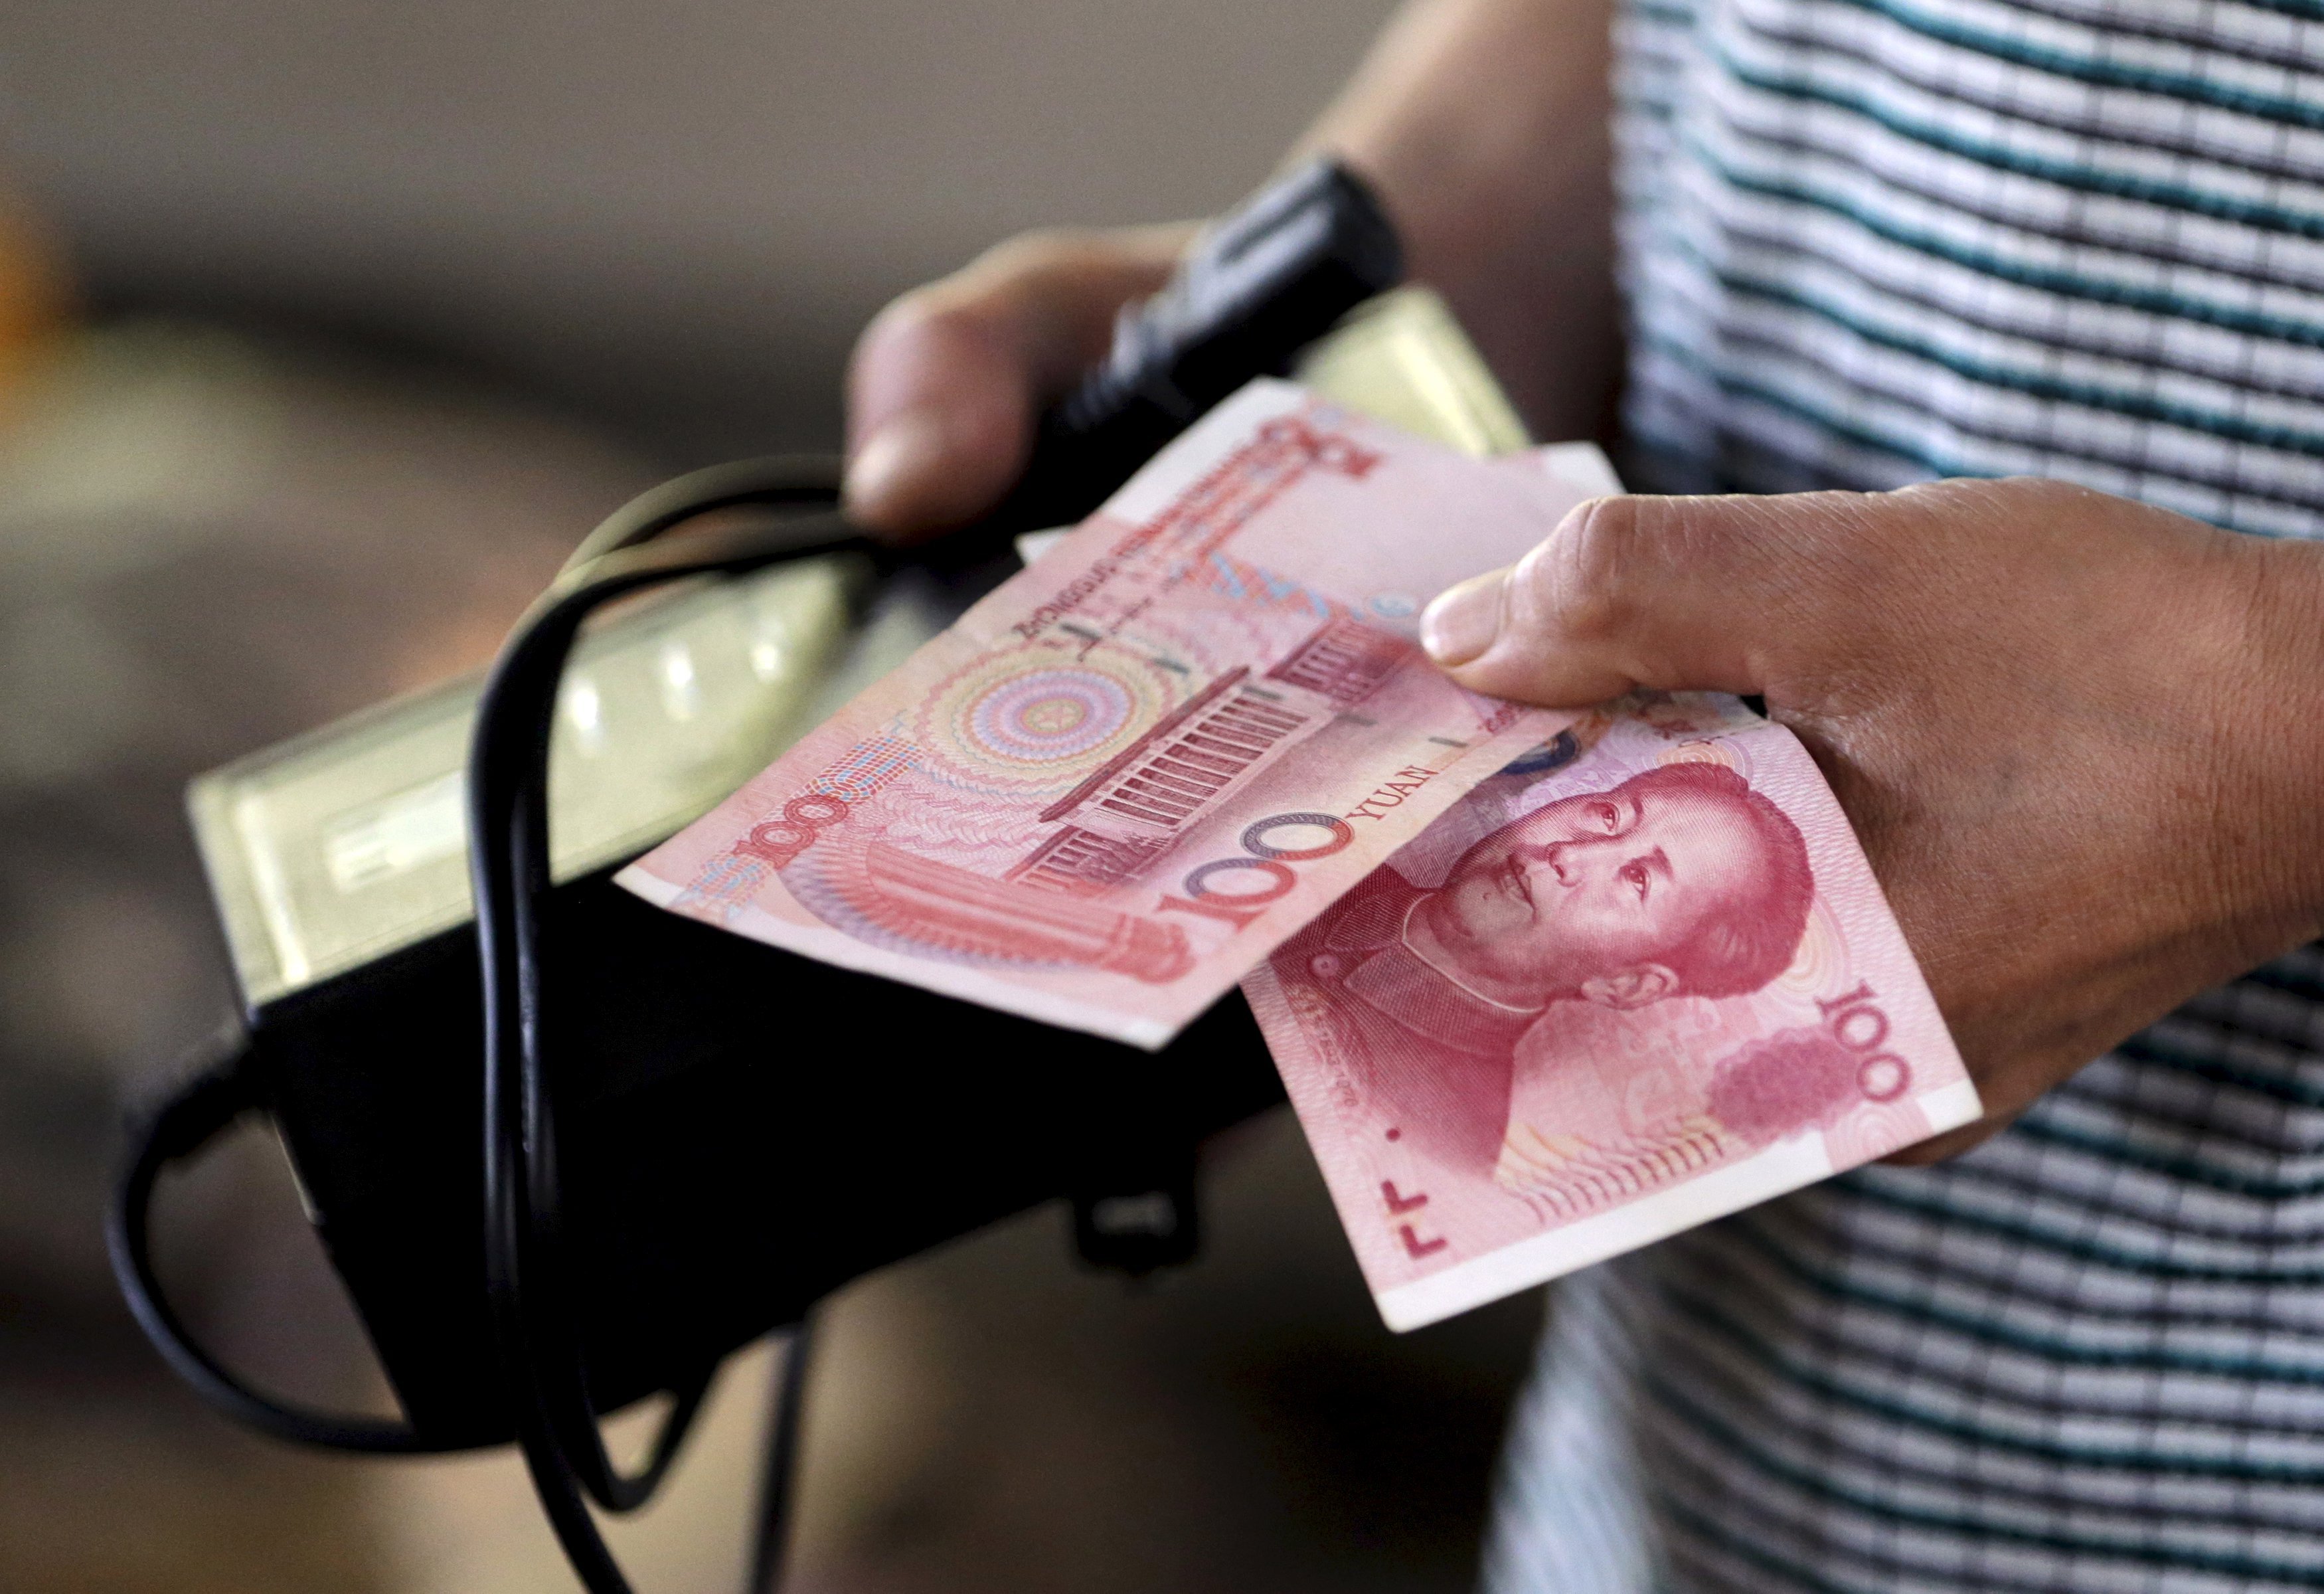 A customer holds a 100 Yuan note at a market in Beijing, in this August 12, 2015, file photo. The International Monetary Fund is expected to add China's yuan to its benchmark currency basket at a board meeting in a symbolic win for Beijing, November 30, 2015. REUTERS/Jason Lee/FilesGLOBAL BUSINESS WEEK AHEAD PACKAGE - SEARCH 'BUSINESS WEEK AHEAD NOVEMBER 30' FOR ALL IMAGES